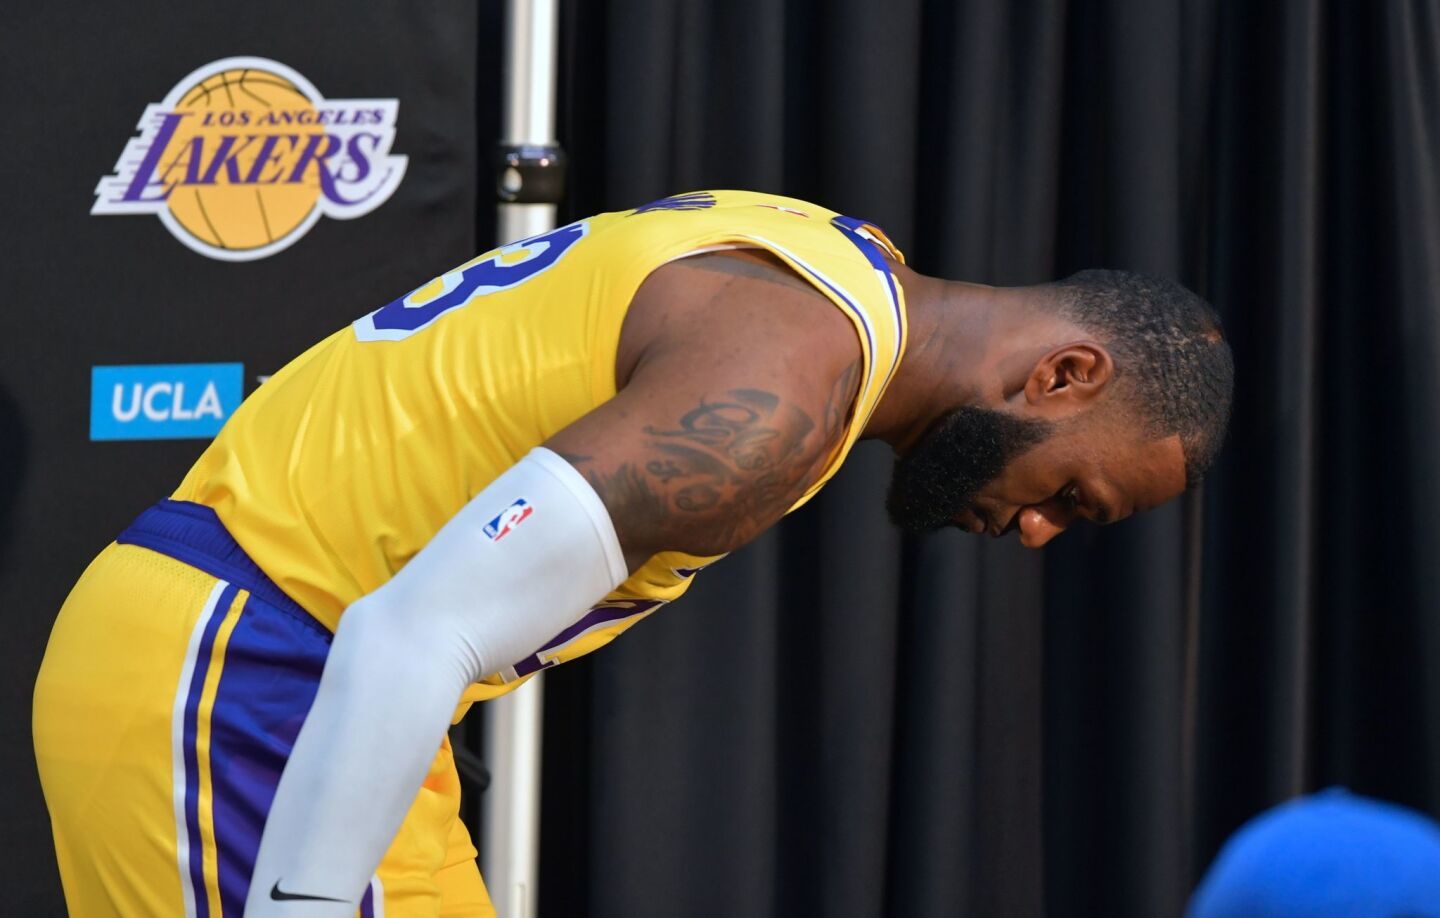 TOPSHOT - LeBron James appears to look for something while stepping out following his press conference on the team's Media Day event in Los Angeles, California, September 24, 2018. - The Lakers open their 2018 NBA season in Portland on October 18th. (Photo by Frederic J. BROWN / AFP)FREDERIC J. BROWN/AFP/Getty Images ** OUTS - ELSENT, FPG, CM - OUTS * NM, PH, VA if sourced by CT, LA or MoD **